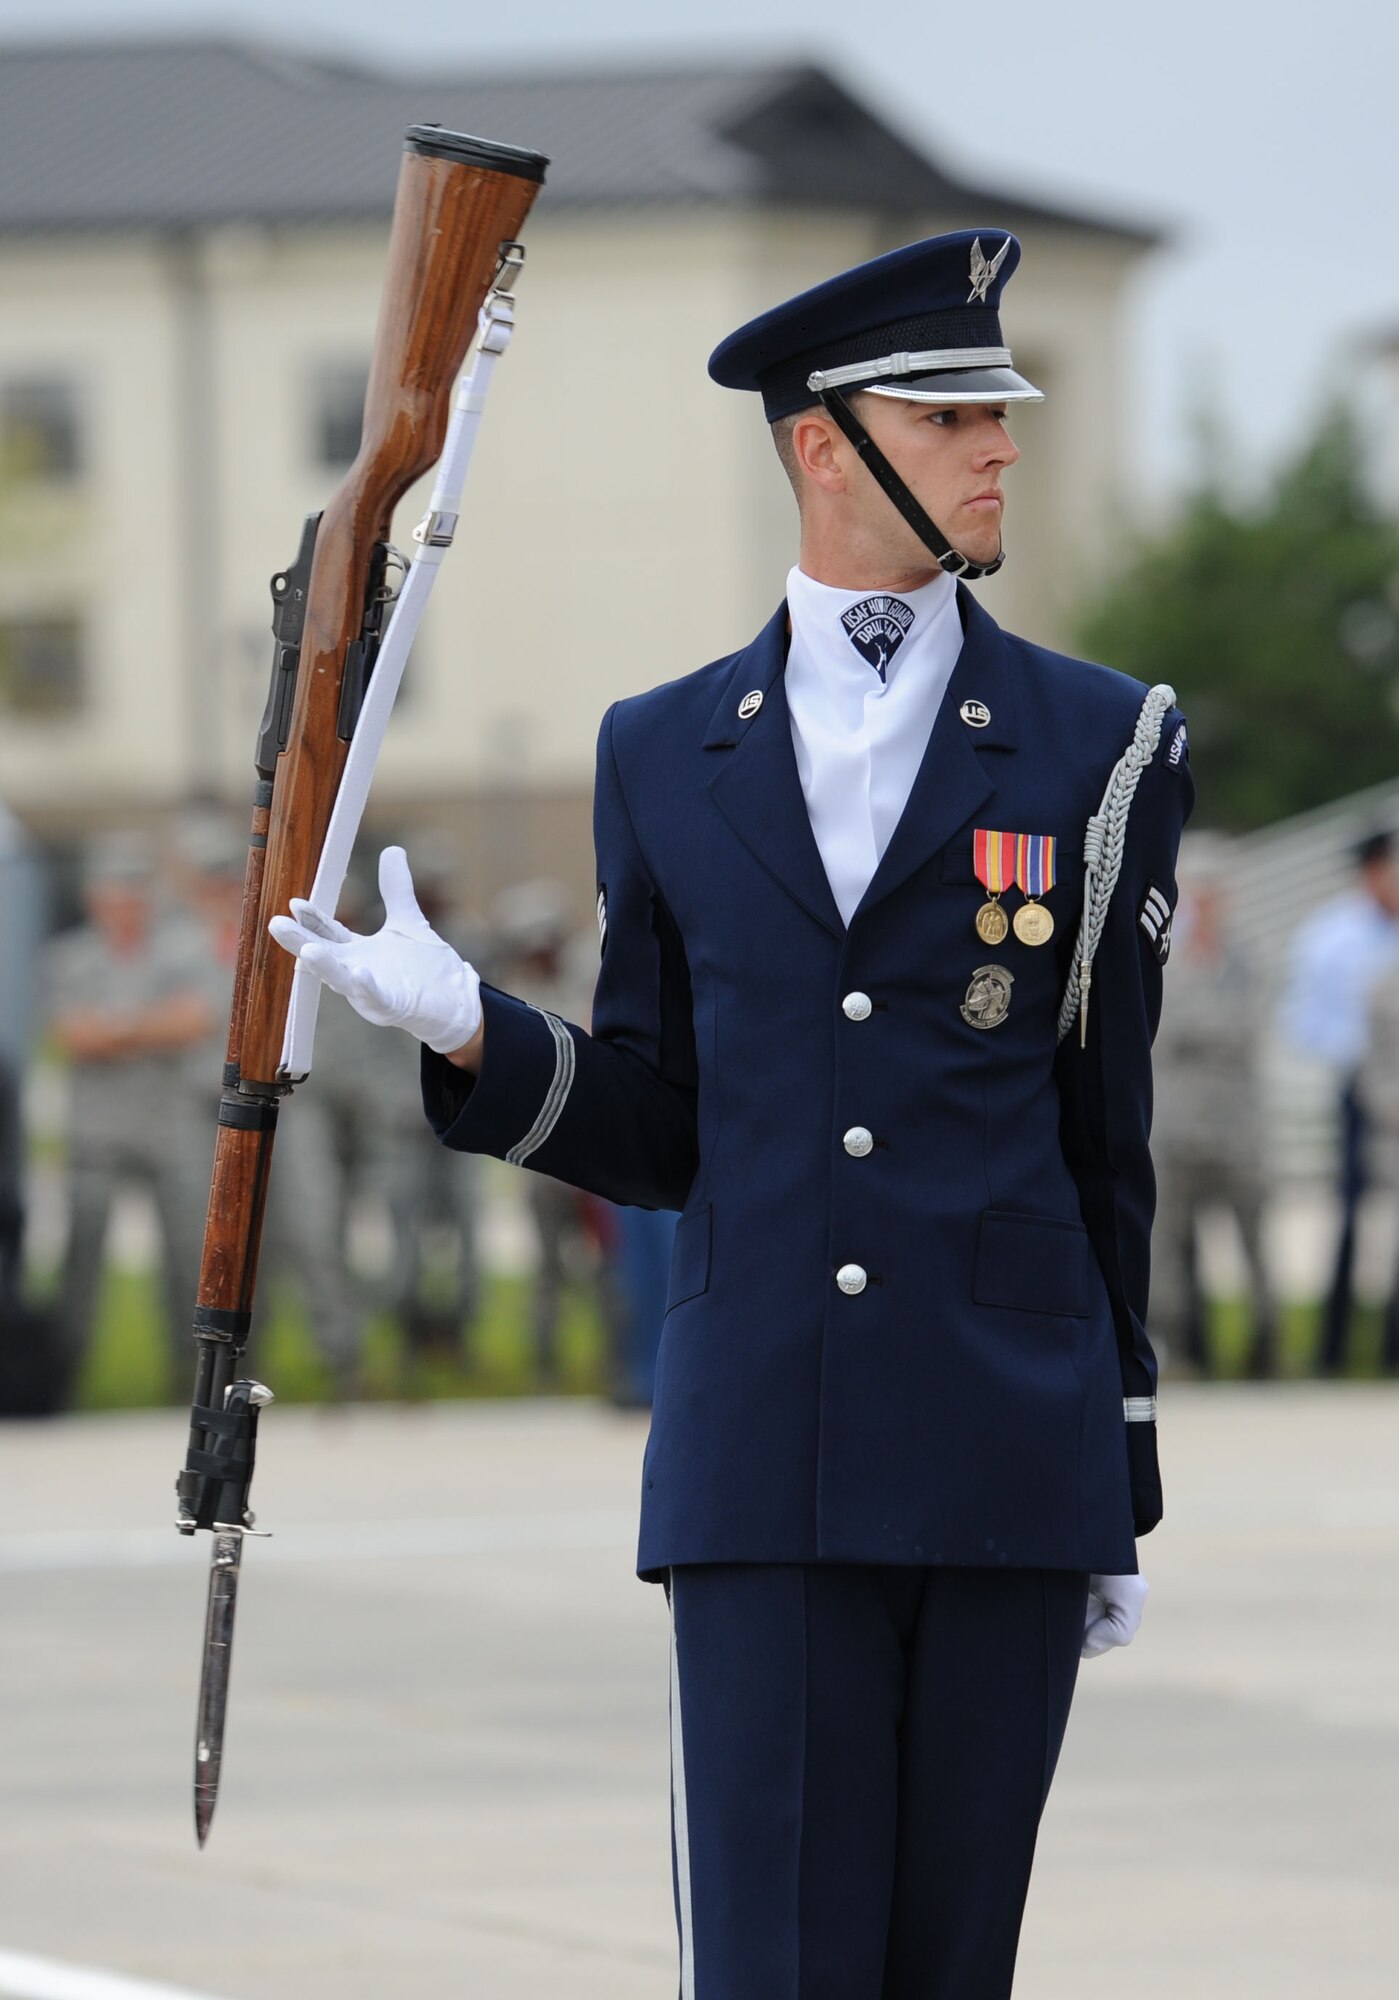 Senior Airman Joshua Blanton, U.S. Air Force Honor Guard Drill Team member, spins a rifle while debuting  the team’s 2017 routine during the 81st Training Group drill down at the Levitow Training Support Facility drill pad March 10, 2017, on Keesler Air Force Base, Miss. The team comes to Keesler every year for five weeks to develop a new routine that they will use throughout the year. (U.S. Air Force photo by Kemberly Groue)